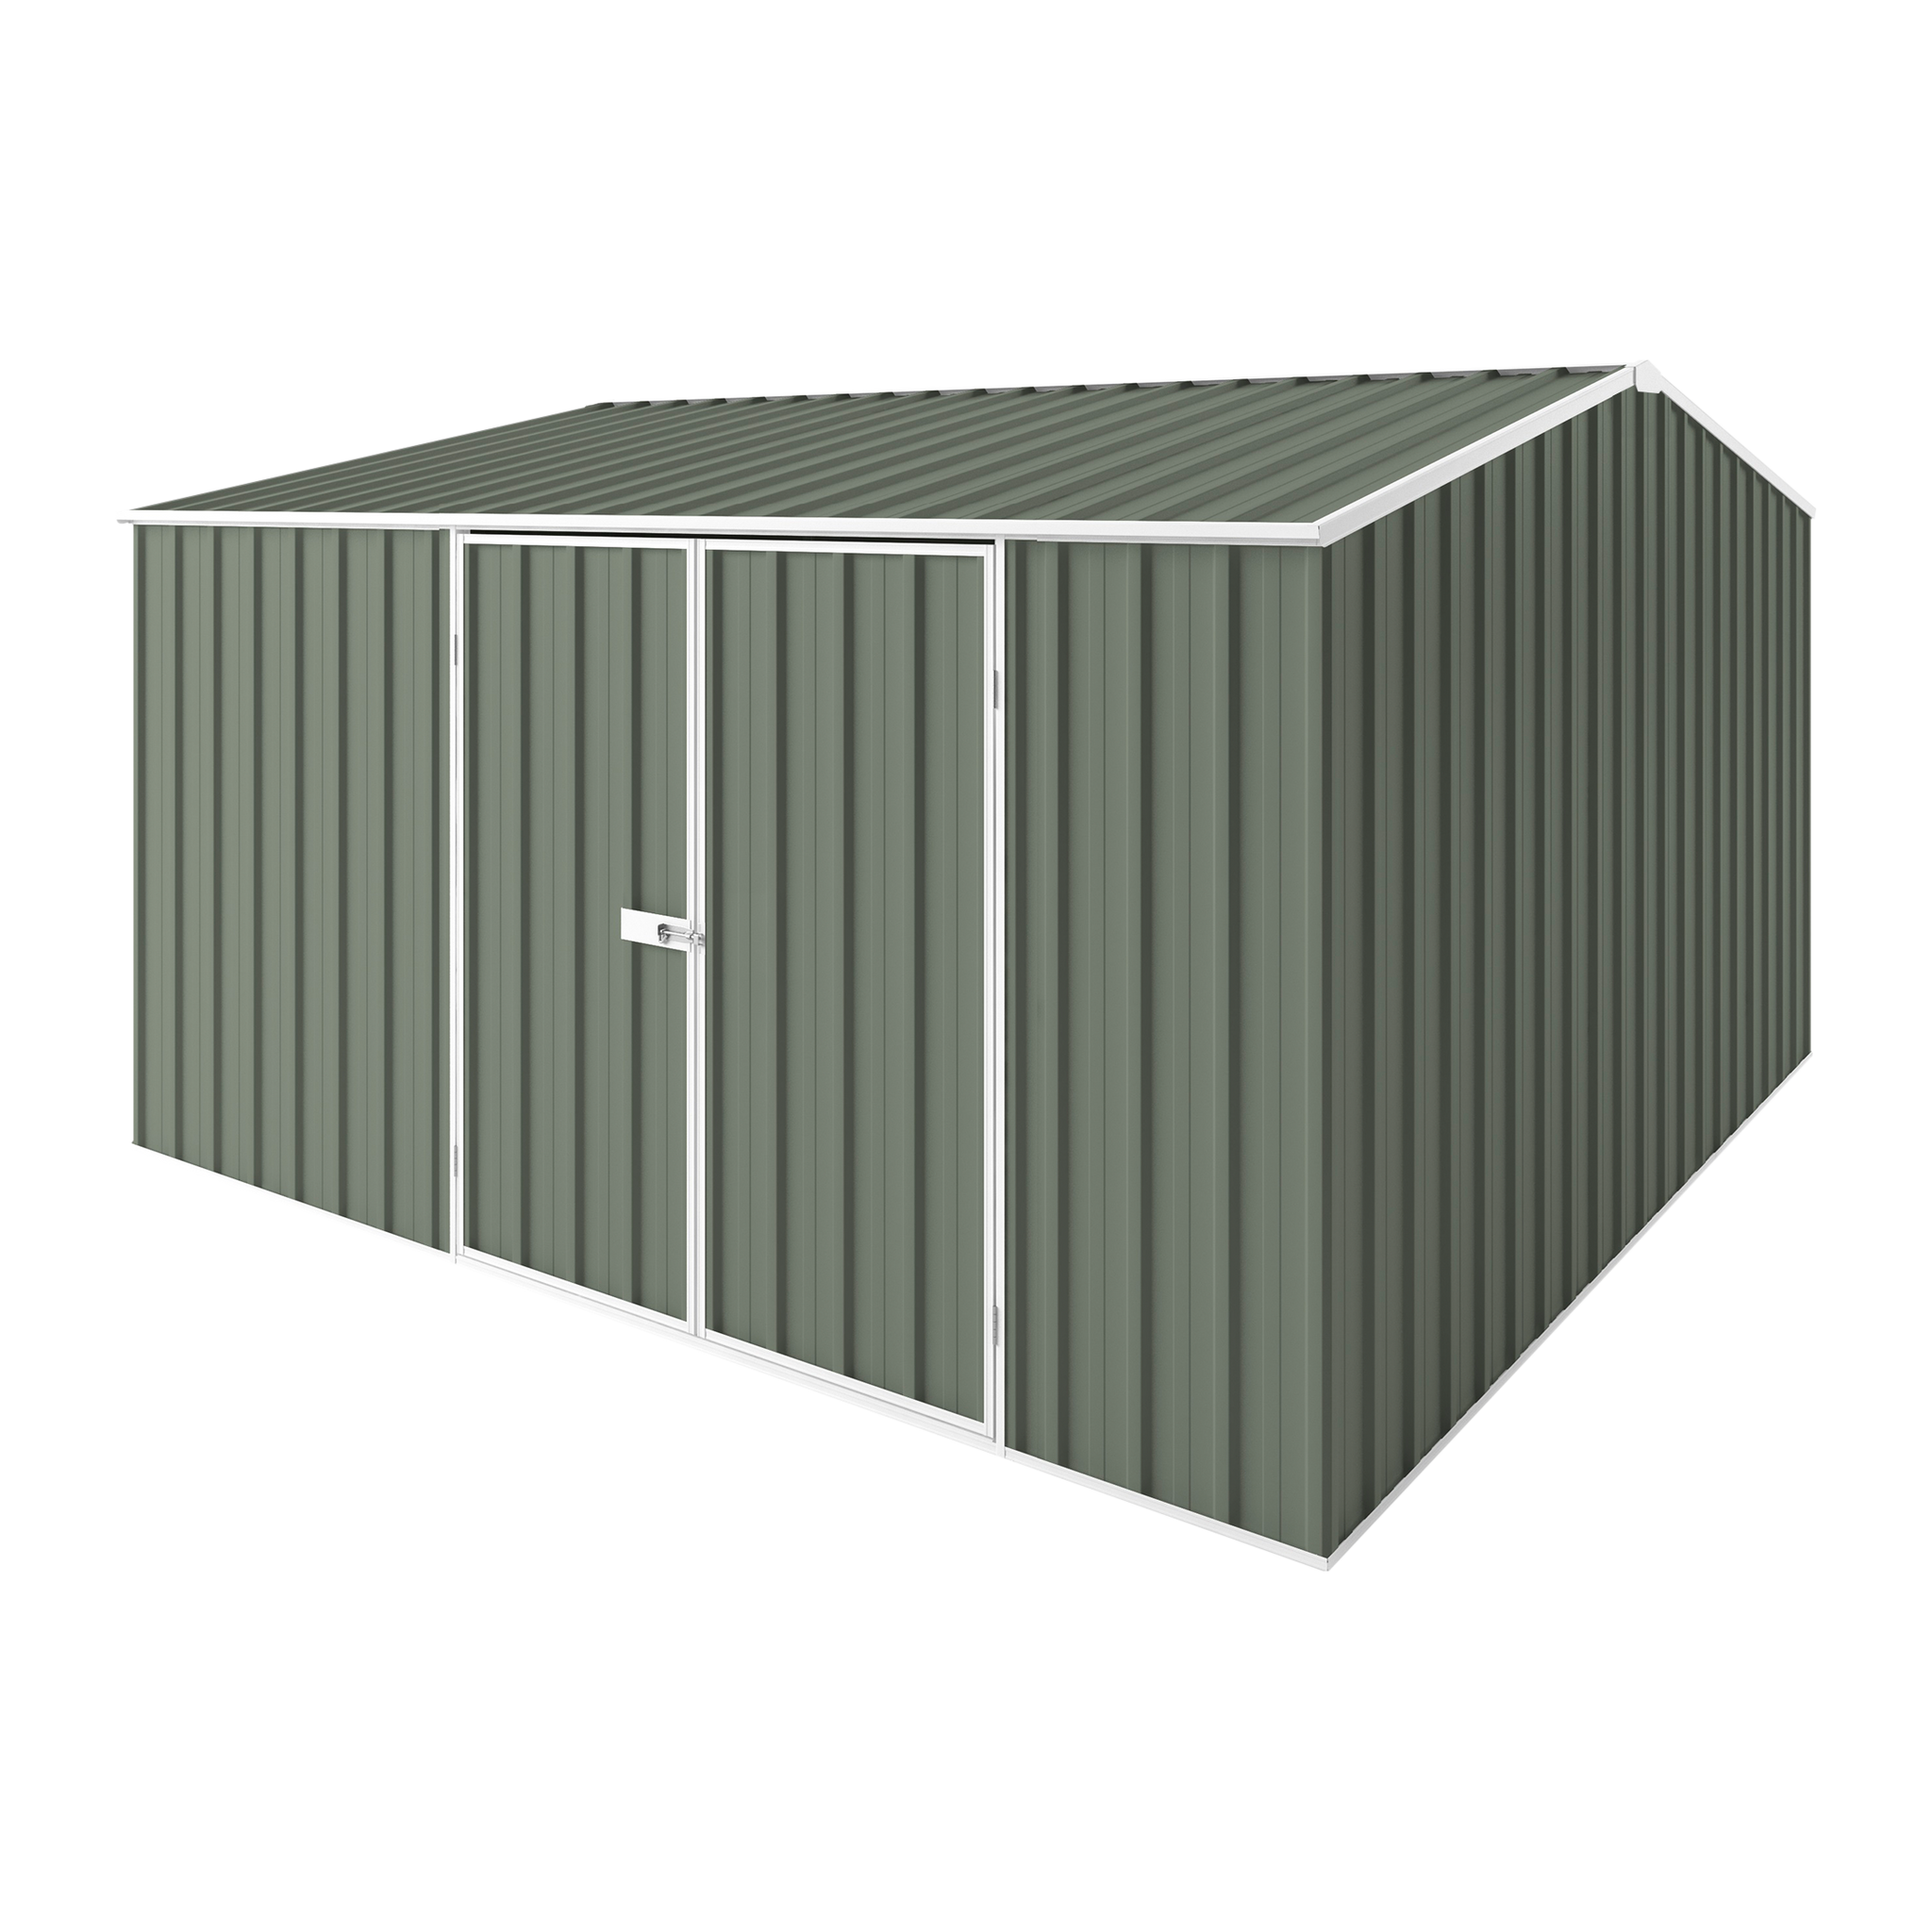 3.75m x 3.75m x 2.18m Gable Roof Garden Shed - EasyShed